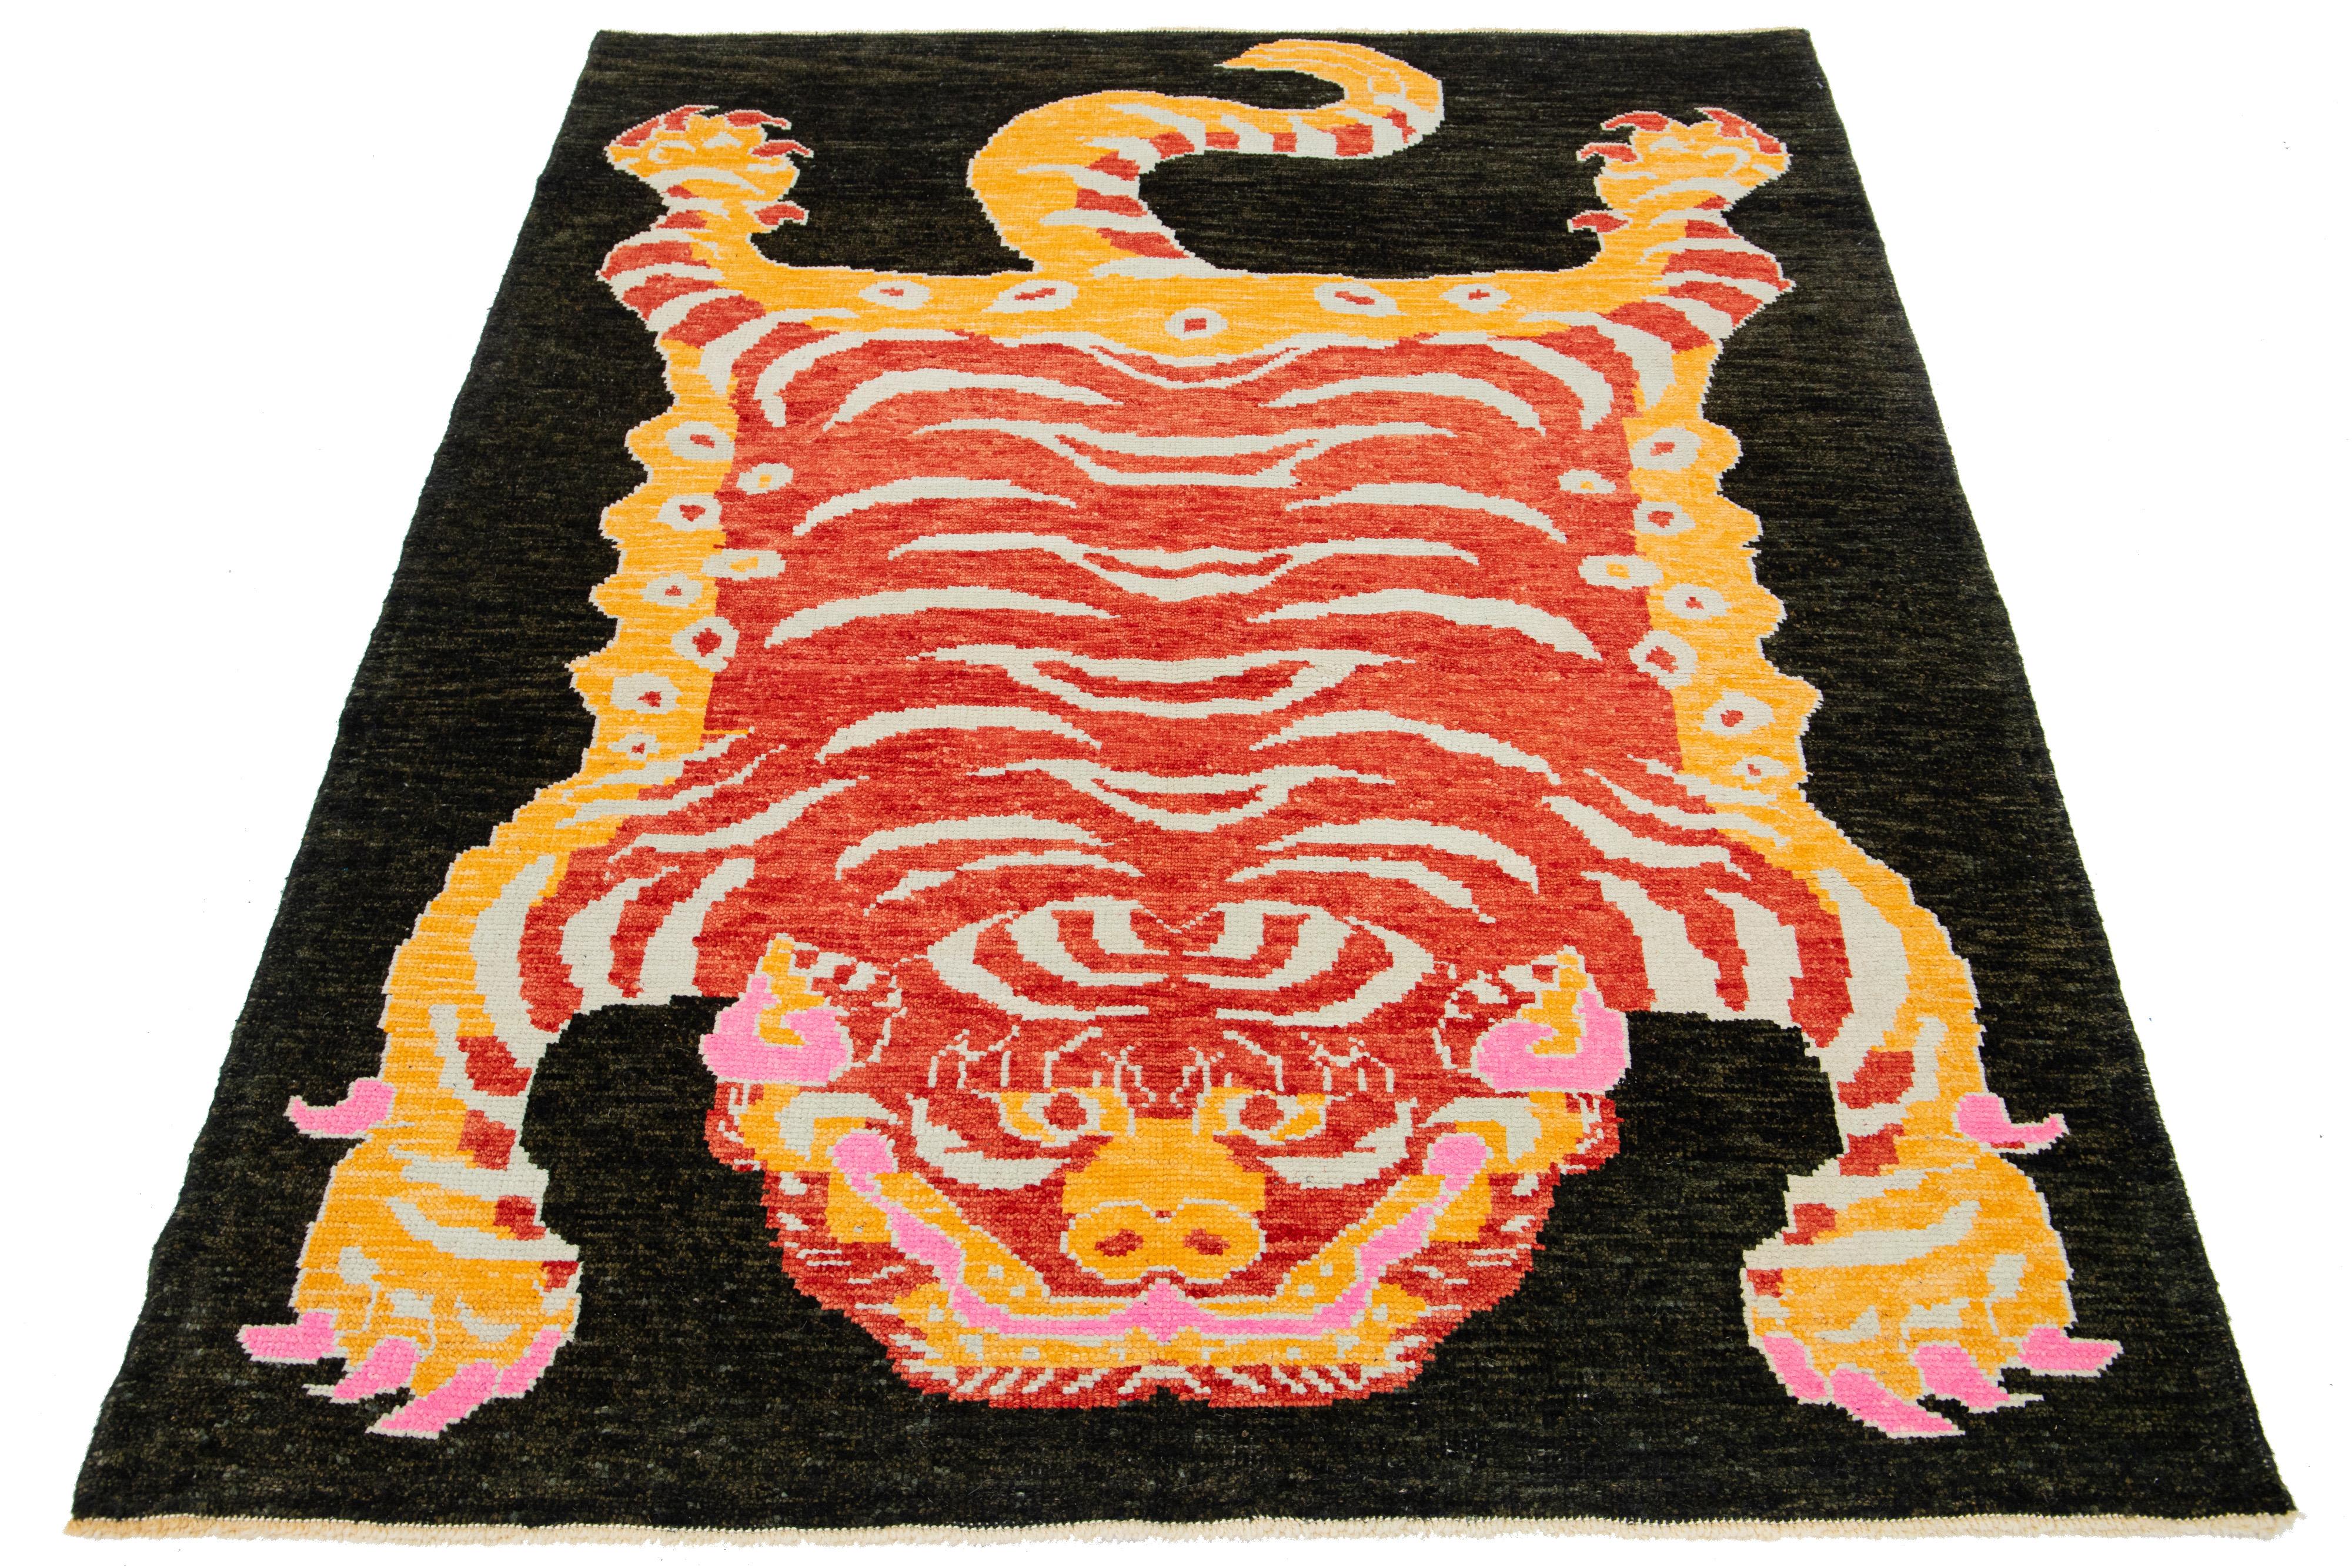 This beautiful Turkish Art Deco wool rug features a dark brown field with orange, red, beige, and pink accent colors and a stunning tiger pictorial design.

This rug measures 5'5